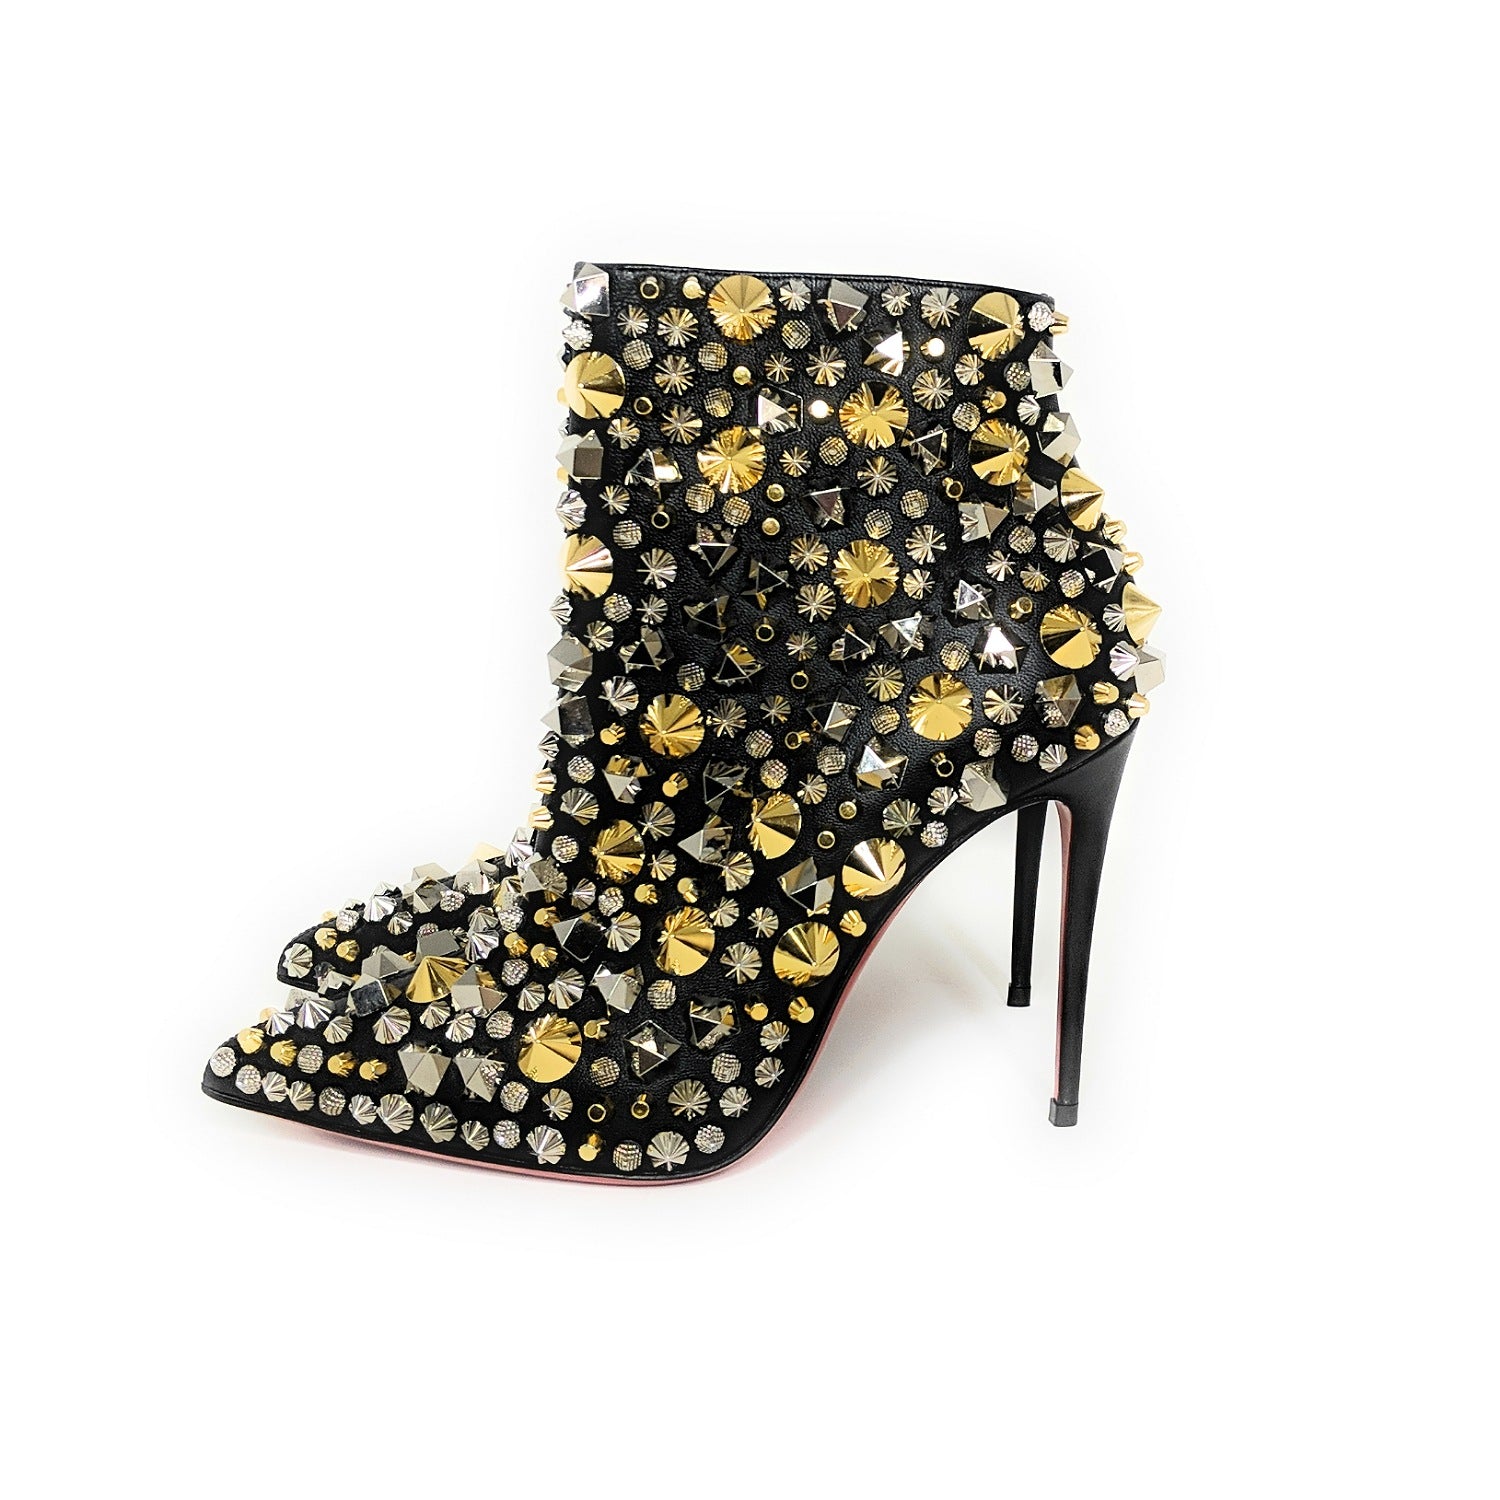 Christian Louboutin Black Stud Embellished So Full Kate Ankle Boots Sz 35.5  - TheRelux.com